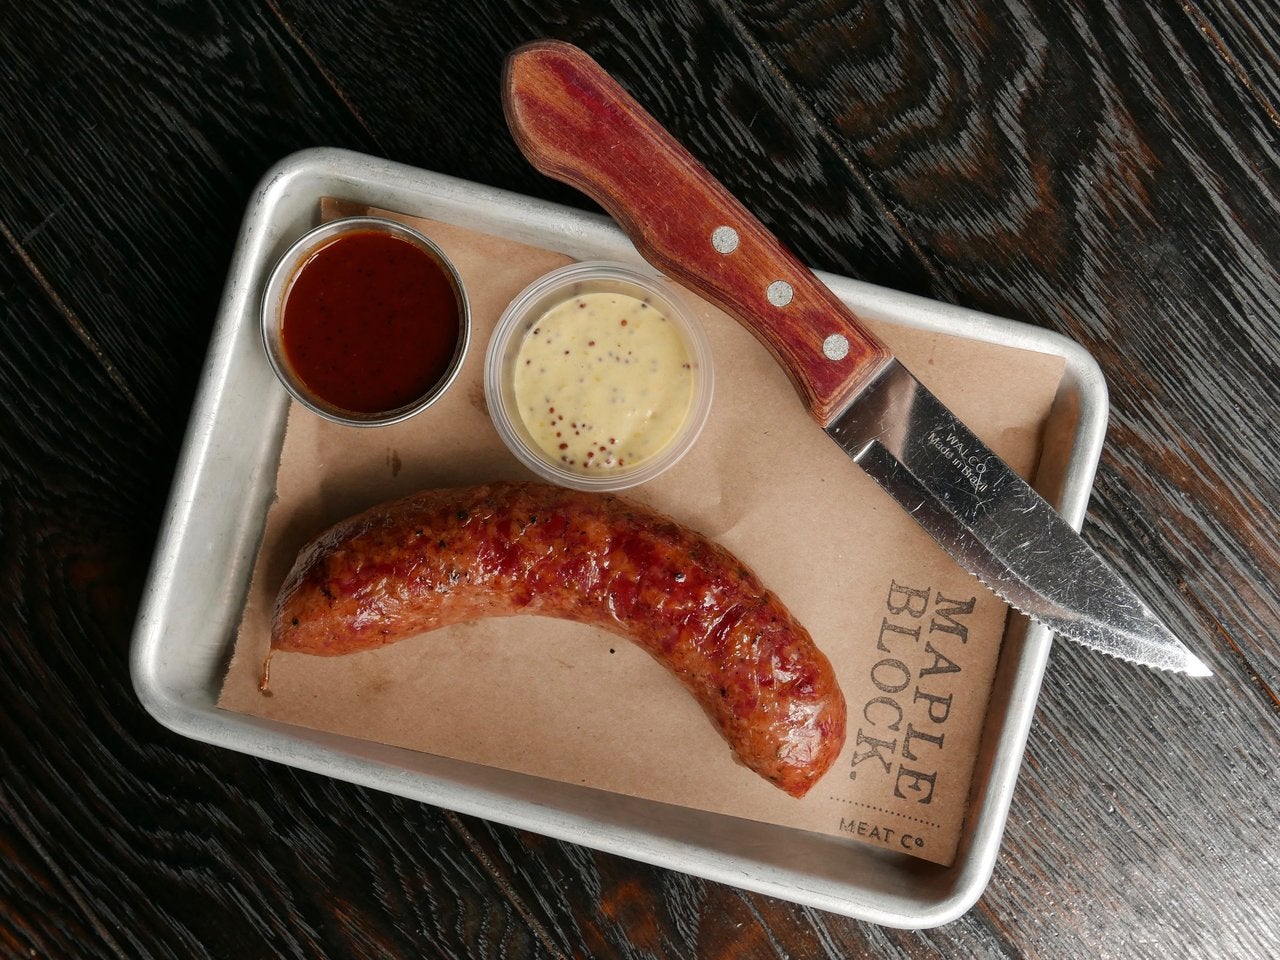 Sausage at Maple Block Meat Co.